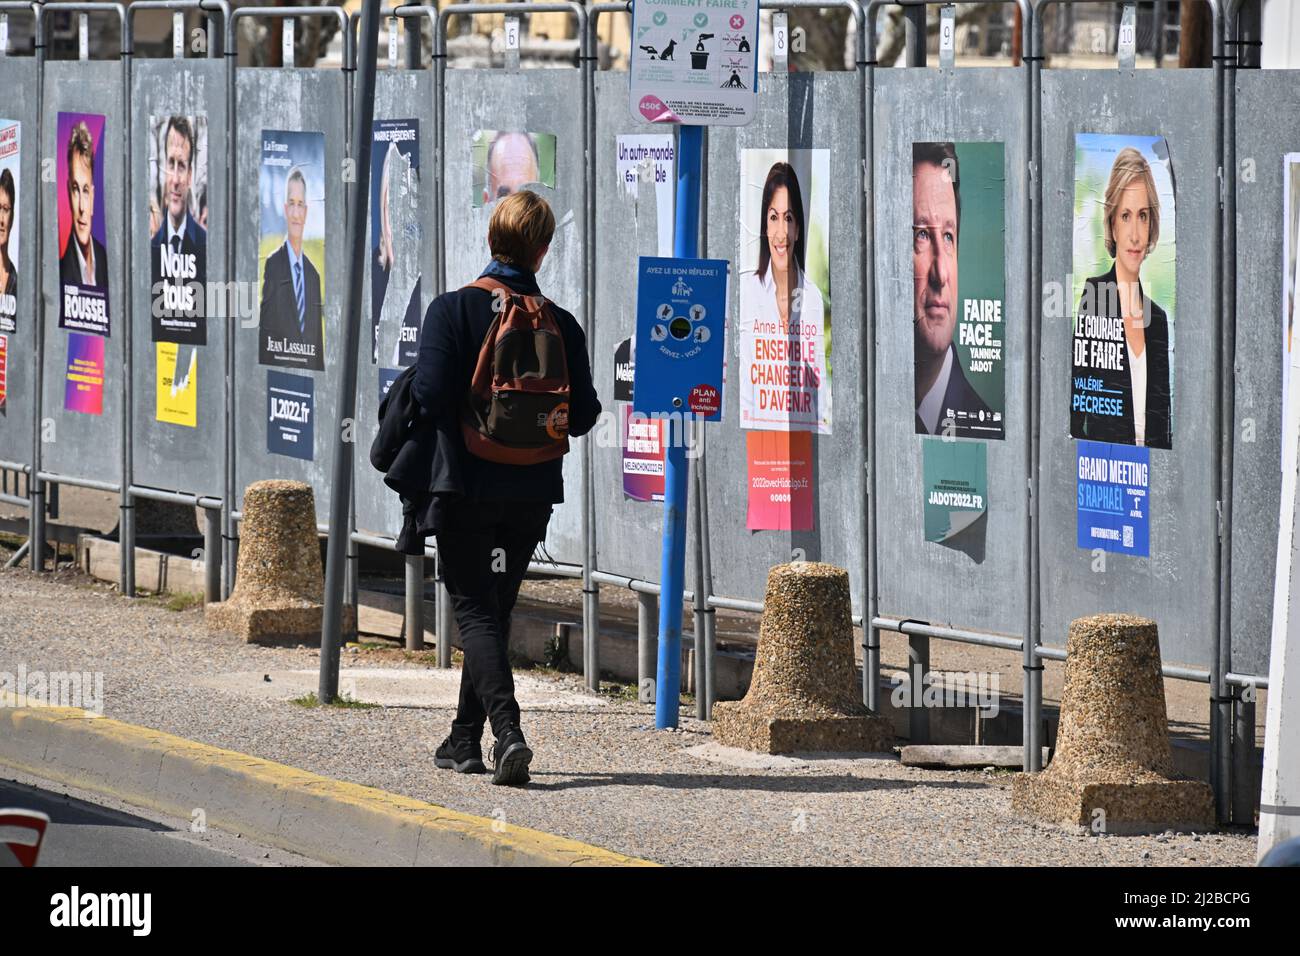 Posters for Presidential candidates are seen in Cannes, France on March 31, 2022. (Photo by Lionel Urman/Sipa USA) Stock Photo